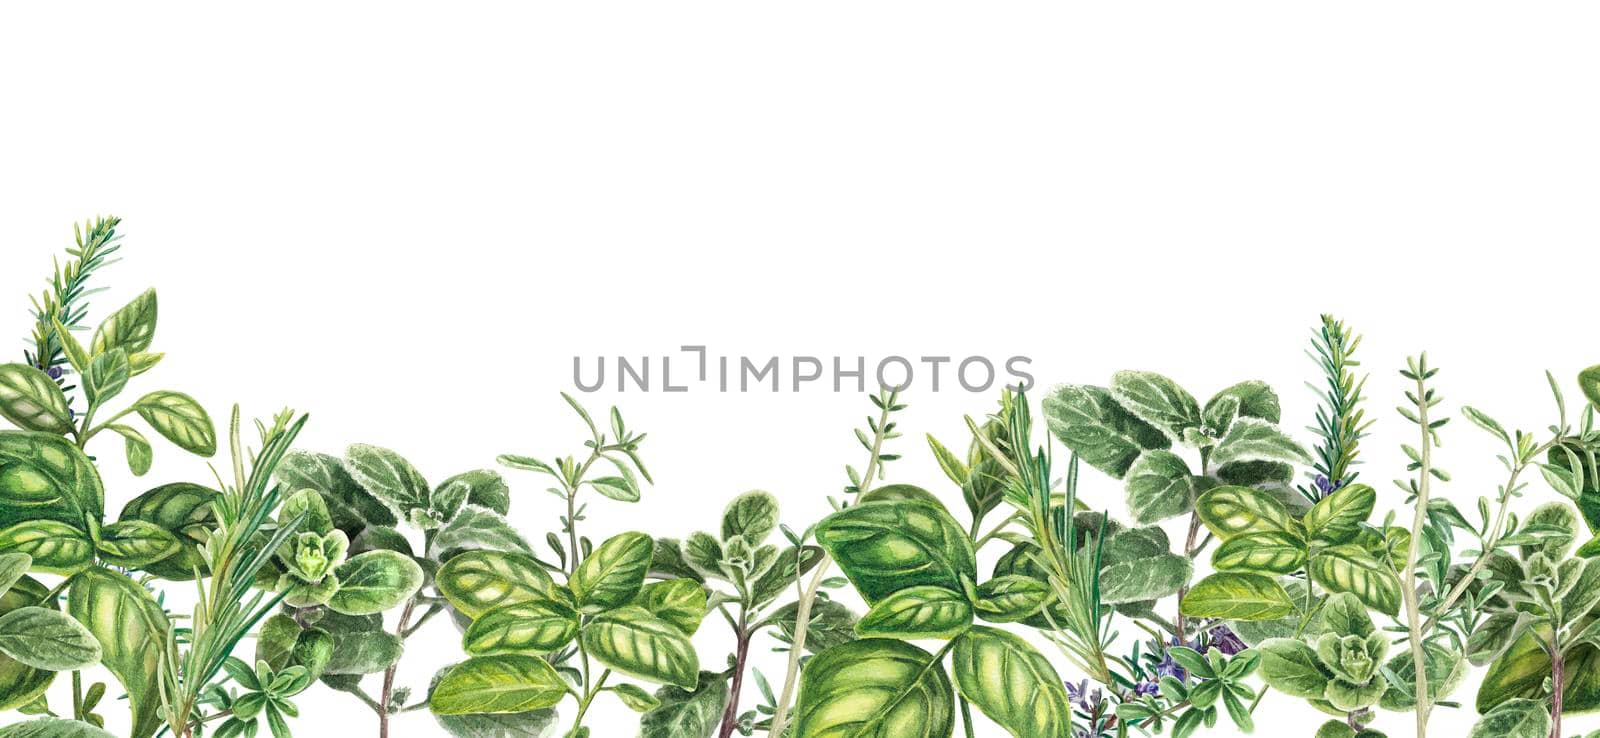 Banner made of fresh Provencal herbs. Seamless horizontal background with basil, marjoram, cumin, rosemary. Watercolor illustration of realistic plants. Suitable for postcards, menus, textiles, pack. by NastyaChe